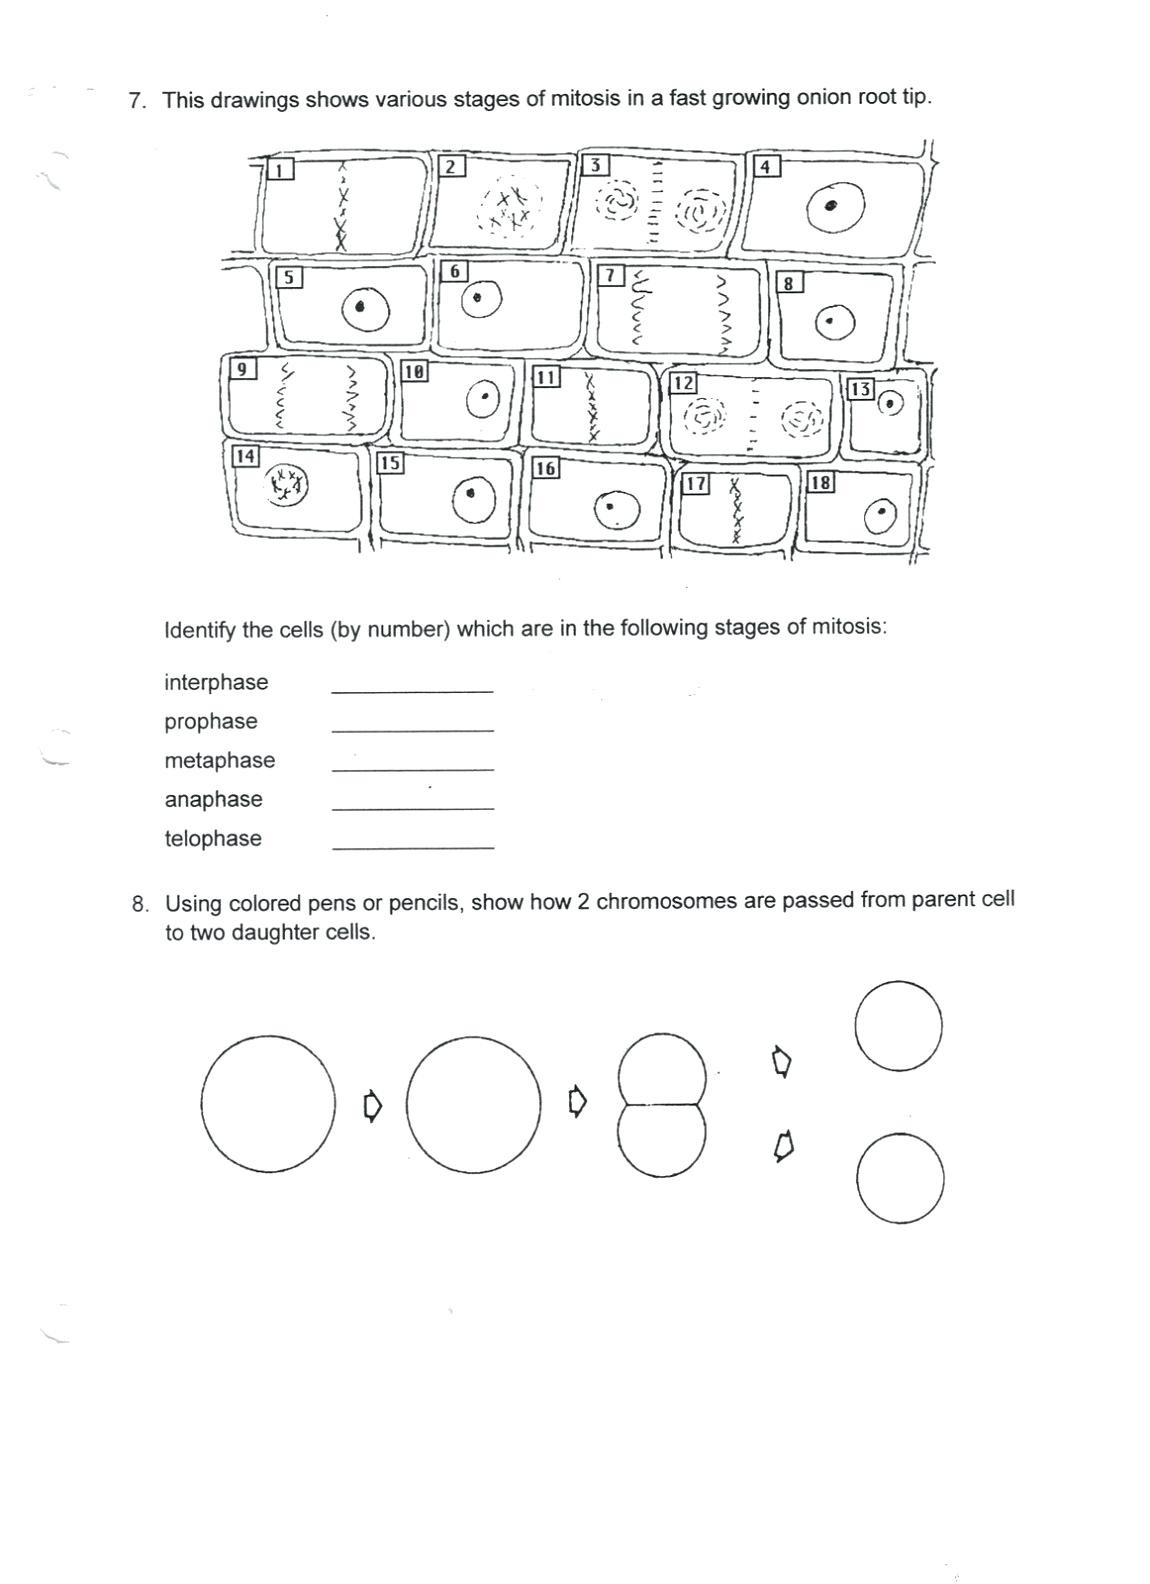 Cell Cycle And Mitosis Coloring Worksheet Answers — db-excel.com